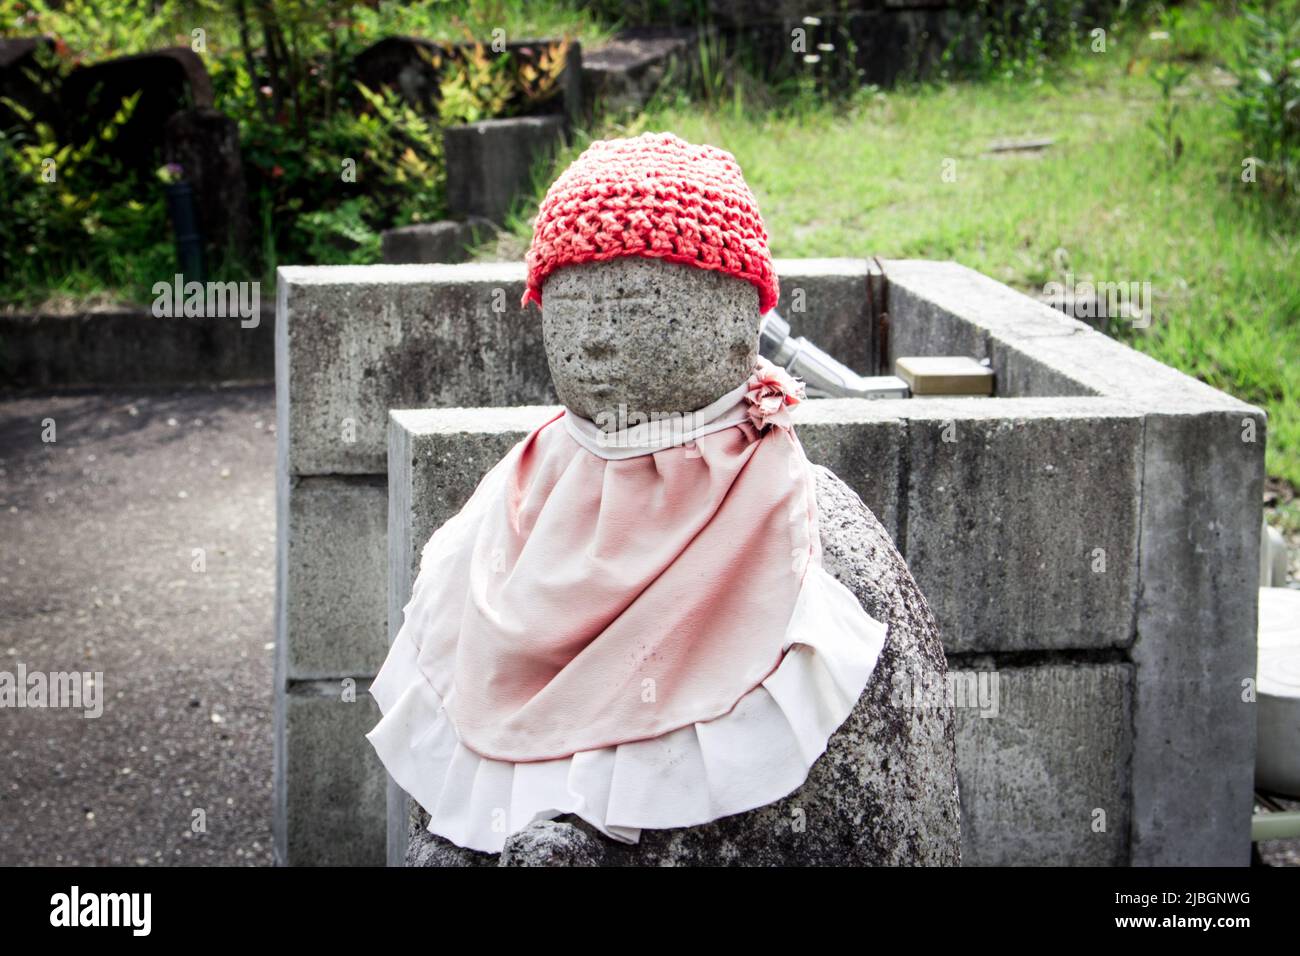 Unknown Jizo image wearing apron and knit hat by unknown sculptor, Nagoya, Japan. Stock Photo